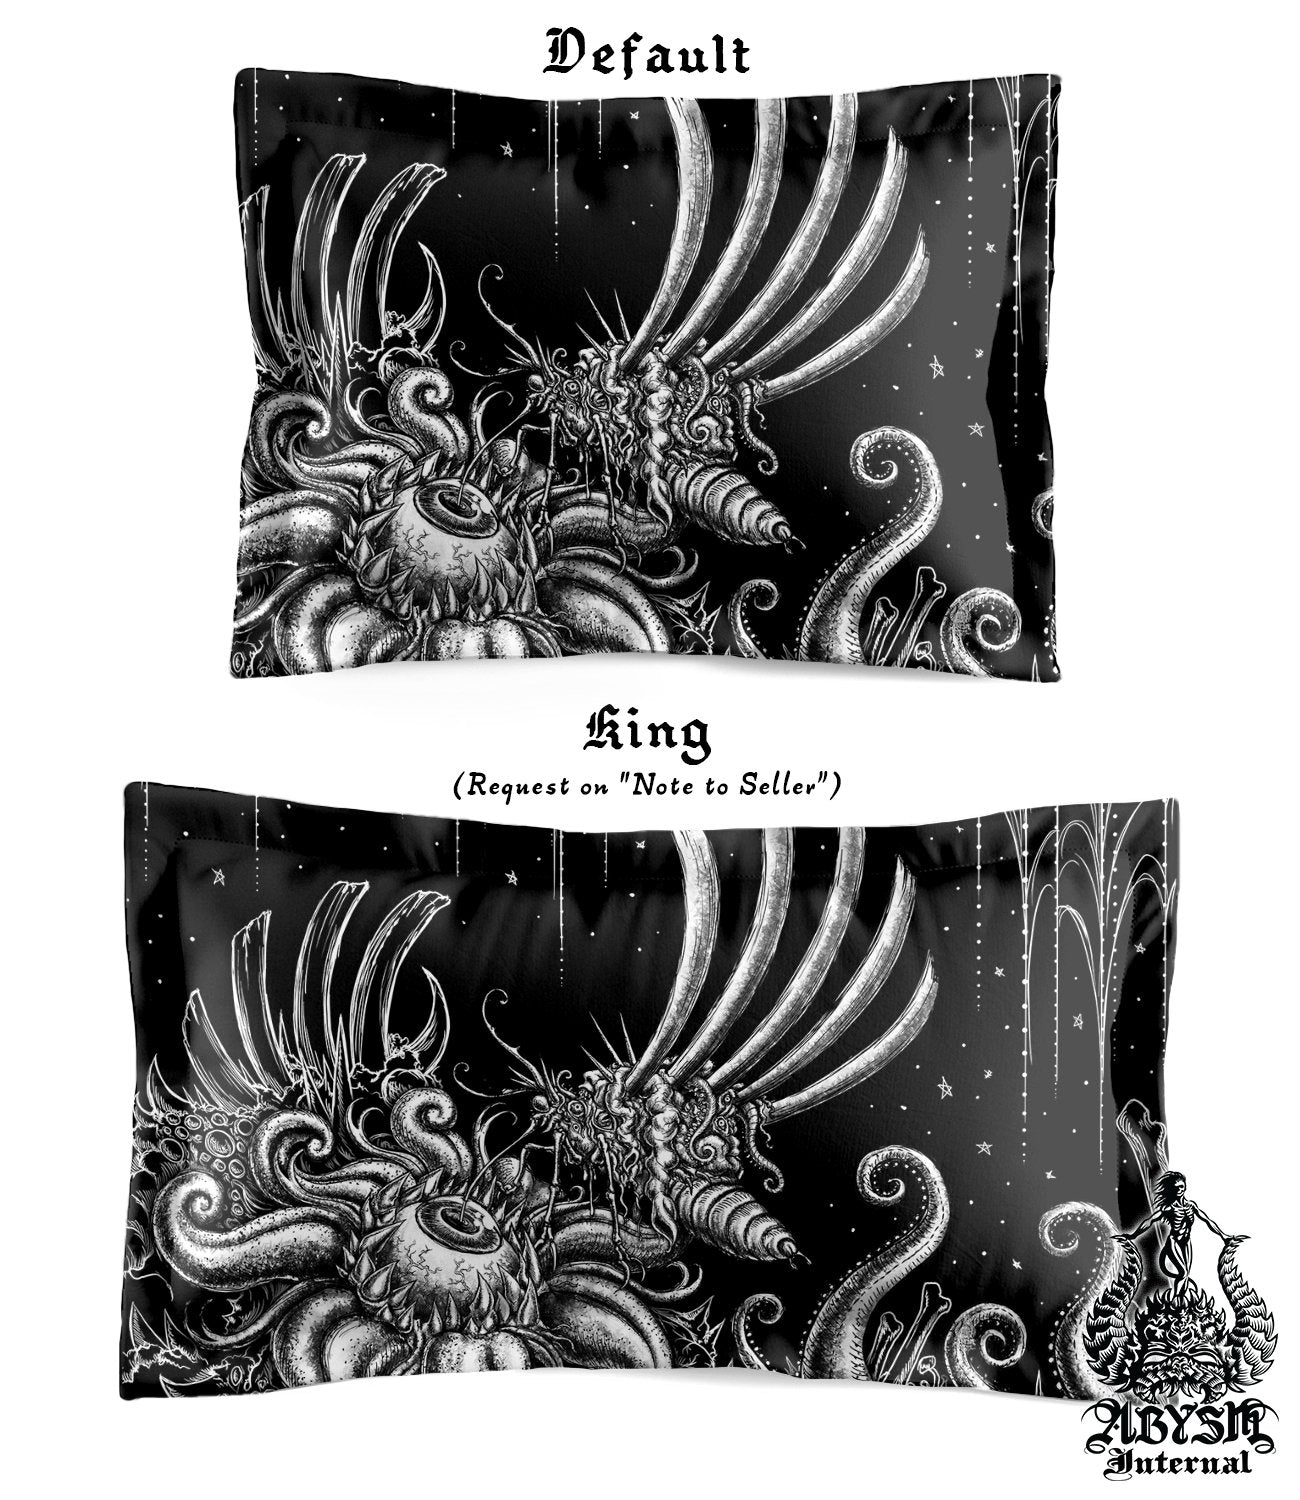 Bloodfly Bedding Set, Comforter and Duvet, Goth Art, Satanic Bed Cover and Bedroom Decor, King, Queen and Twin Size - Gothic Hell - Abysm Internal